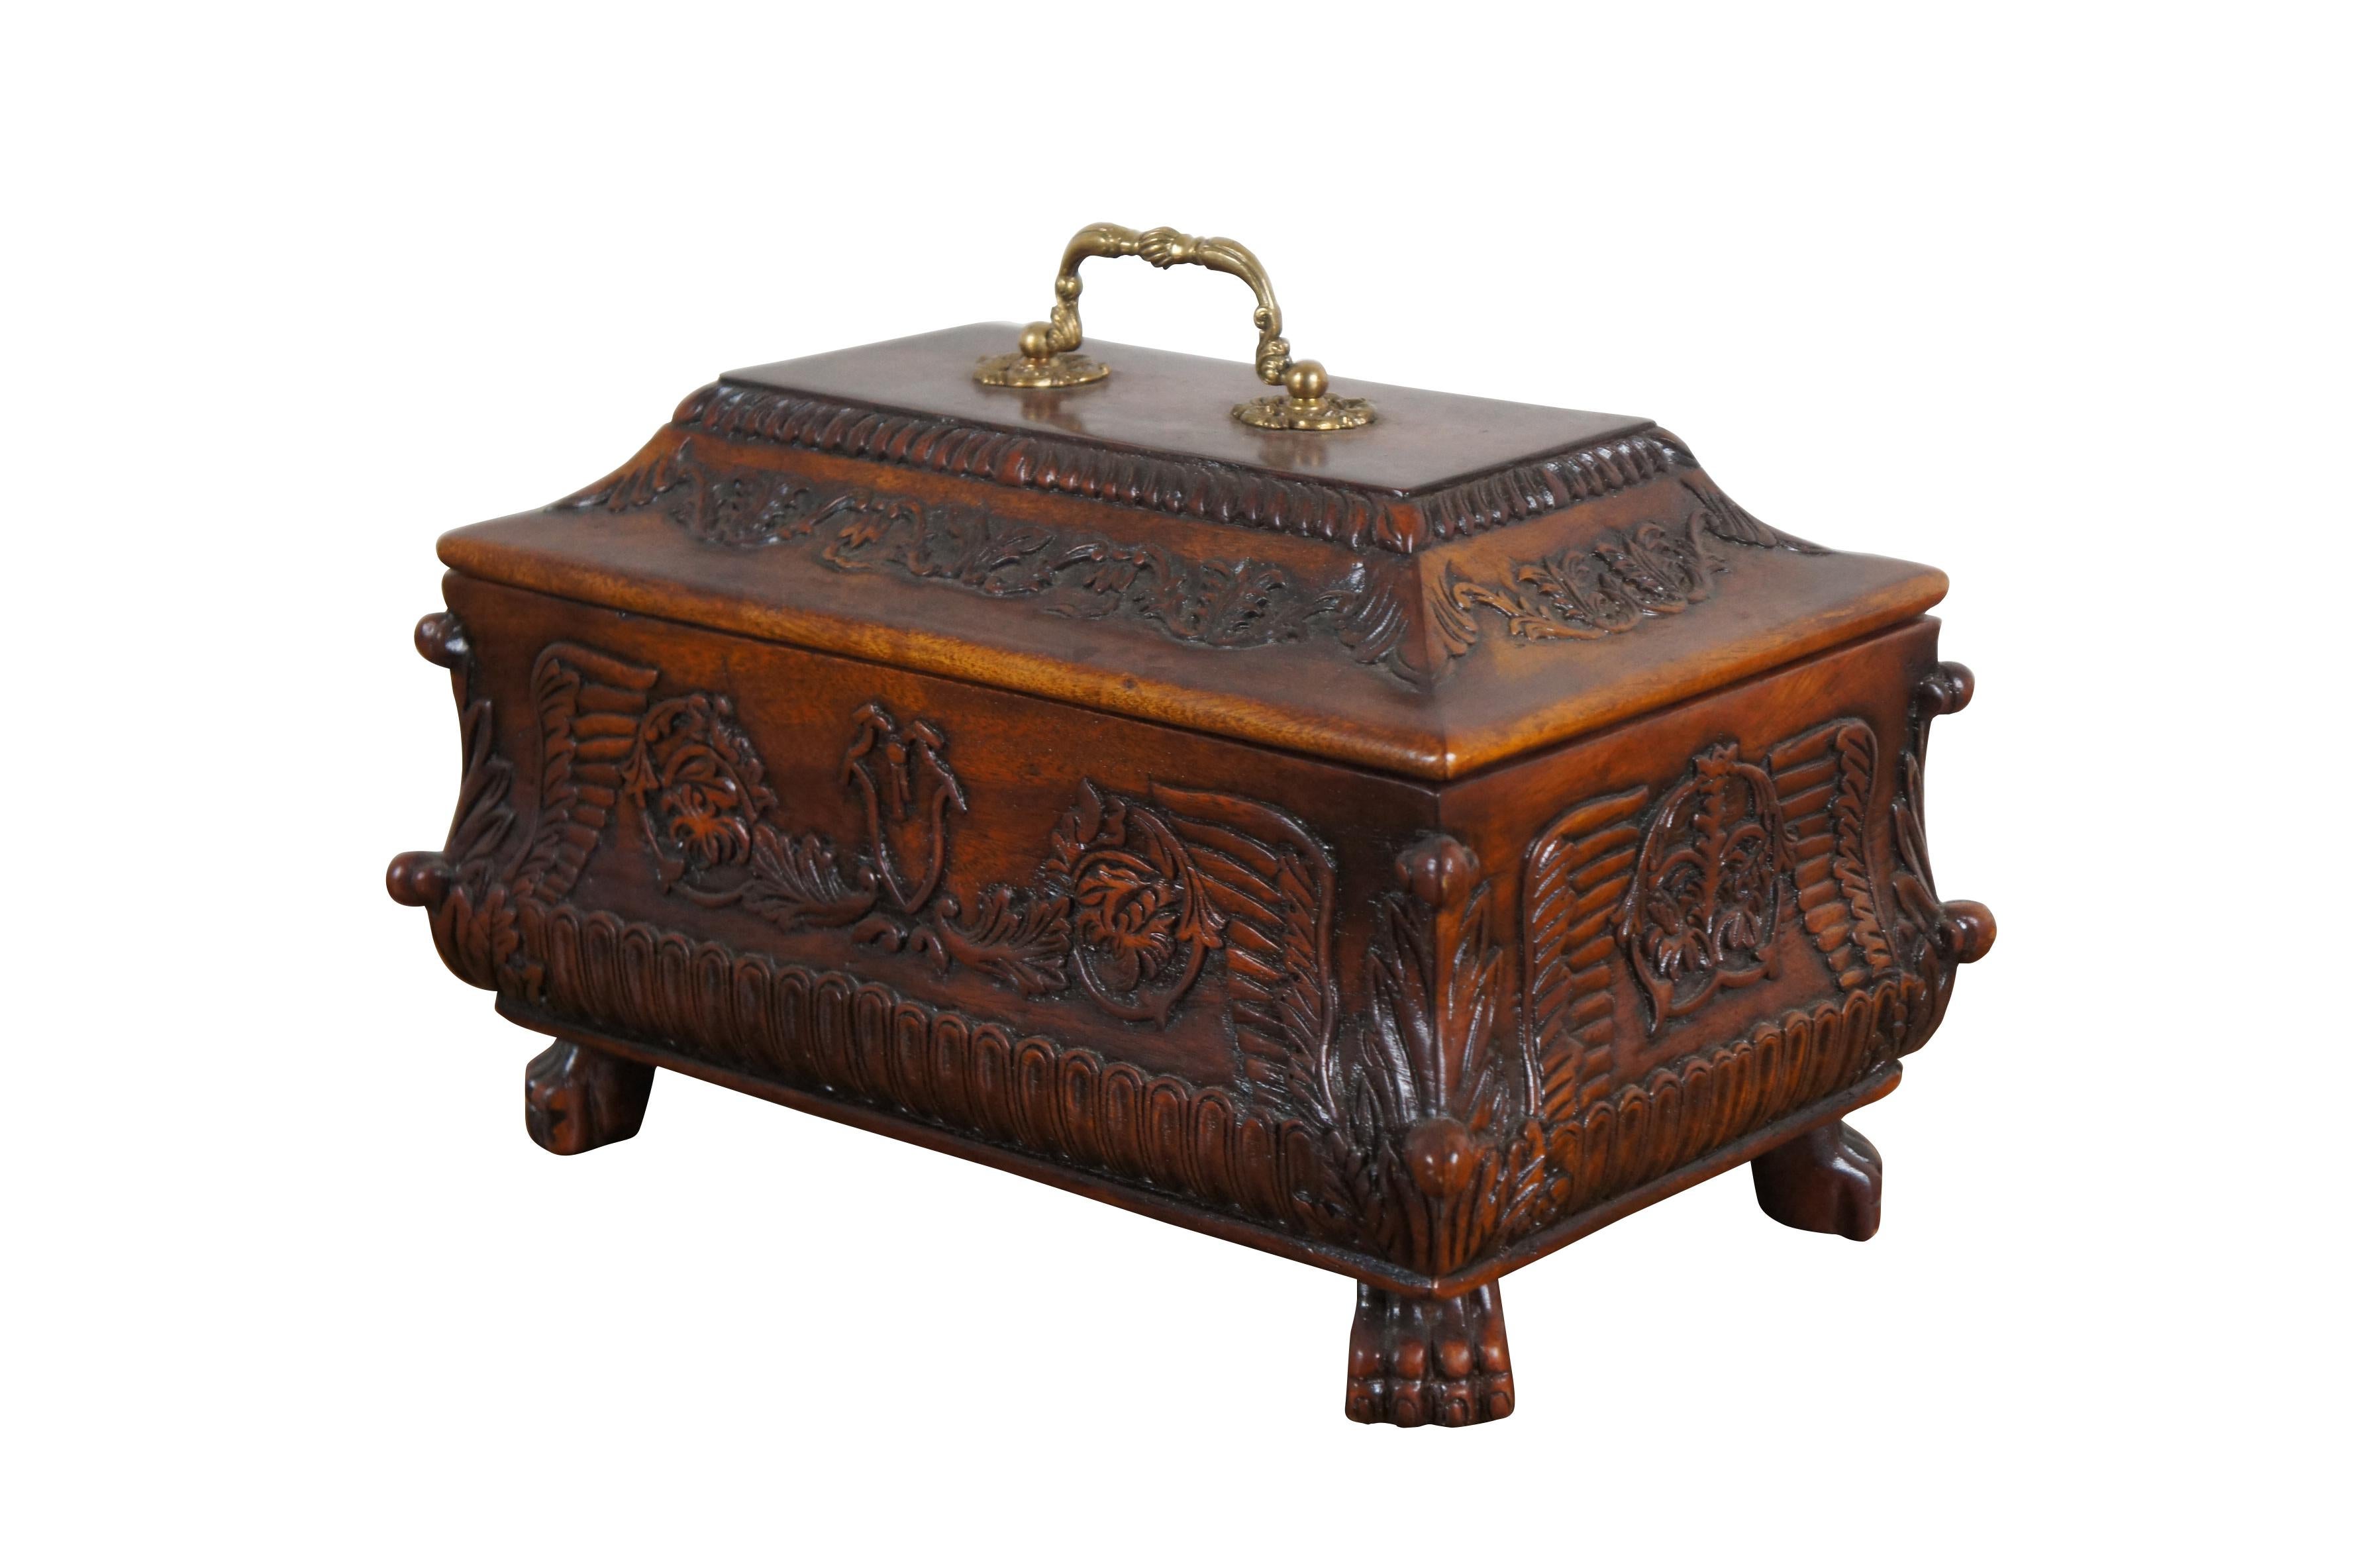 Vintage Theodore Alexander walnut tea caddy / trinket box. Carved in French Empire / Rococo style with shields, foliate designs and winged corners over four claw / paw feet. Foliate gilt brass bail handle.

Dimensions:
13